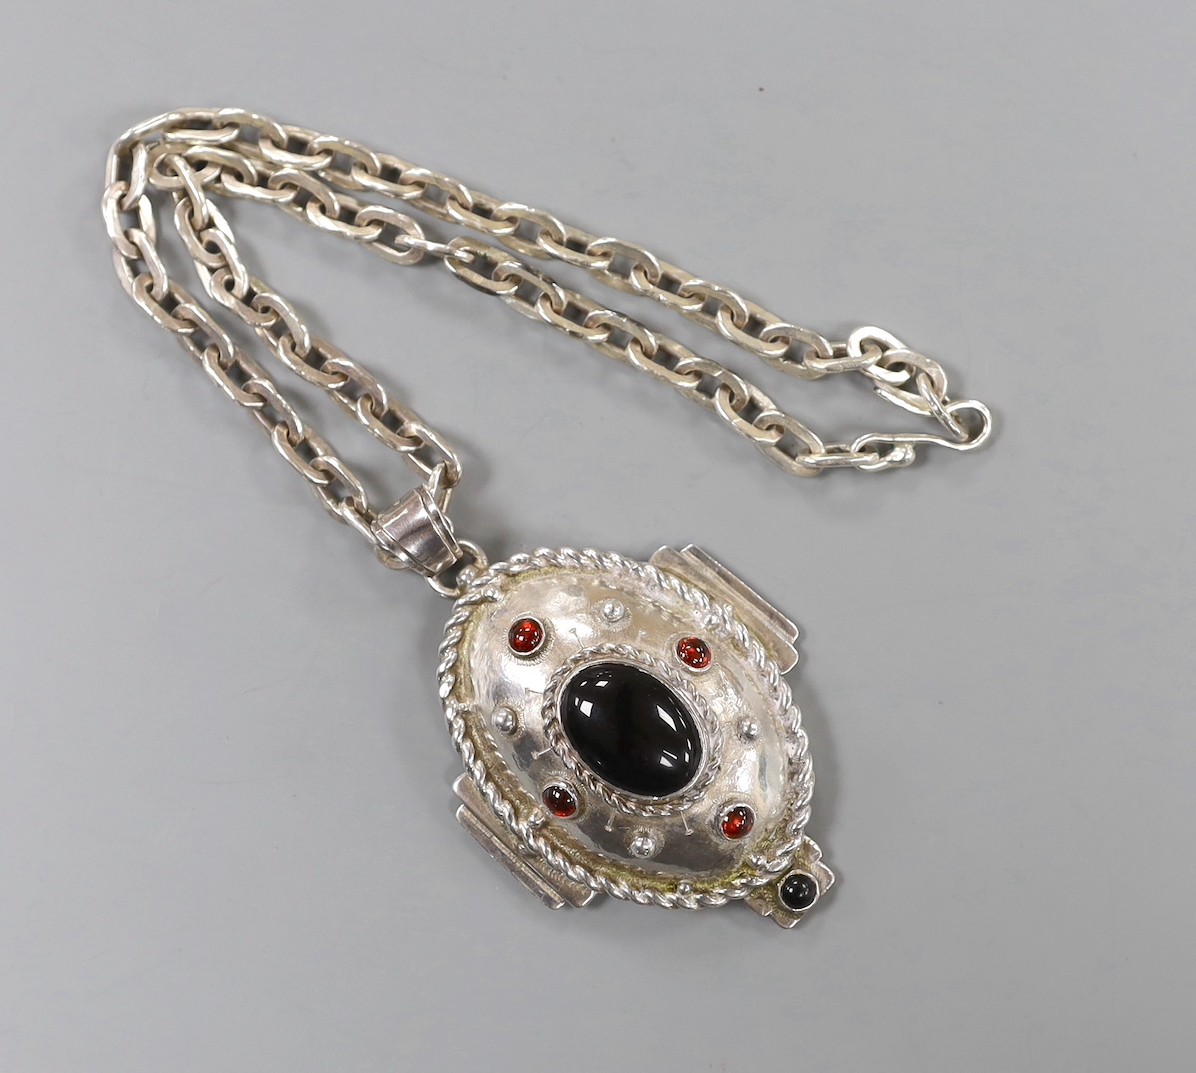 A modern silver and cabochon gem set pendant, on an oval link chain, by Michael Allen Bolton, London, 1992, pendant overall 93mm, chain, 46cm, gross weight 176 grams.